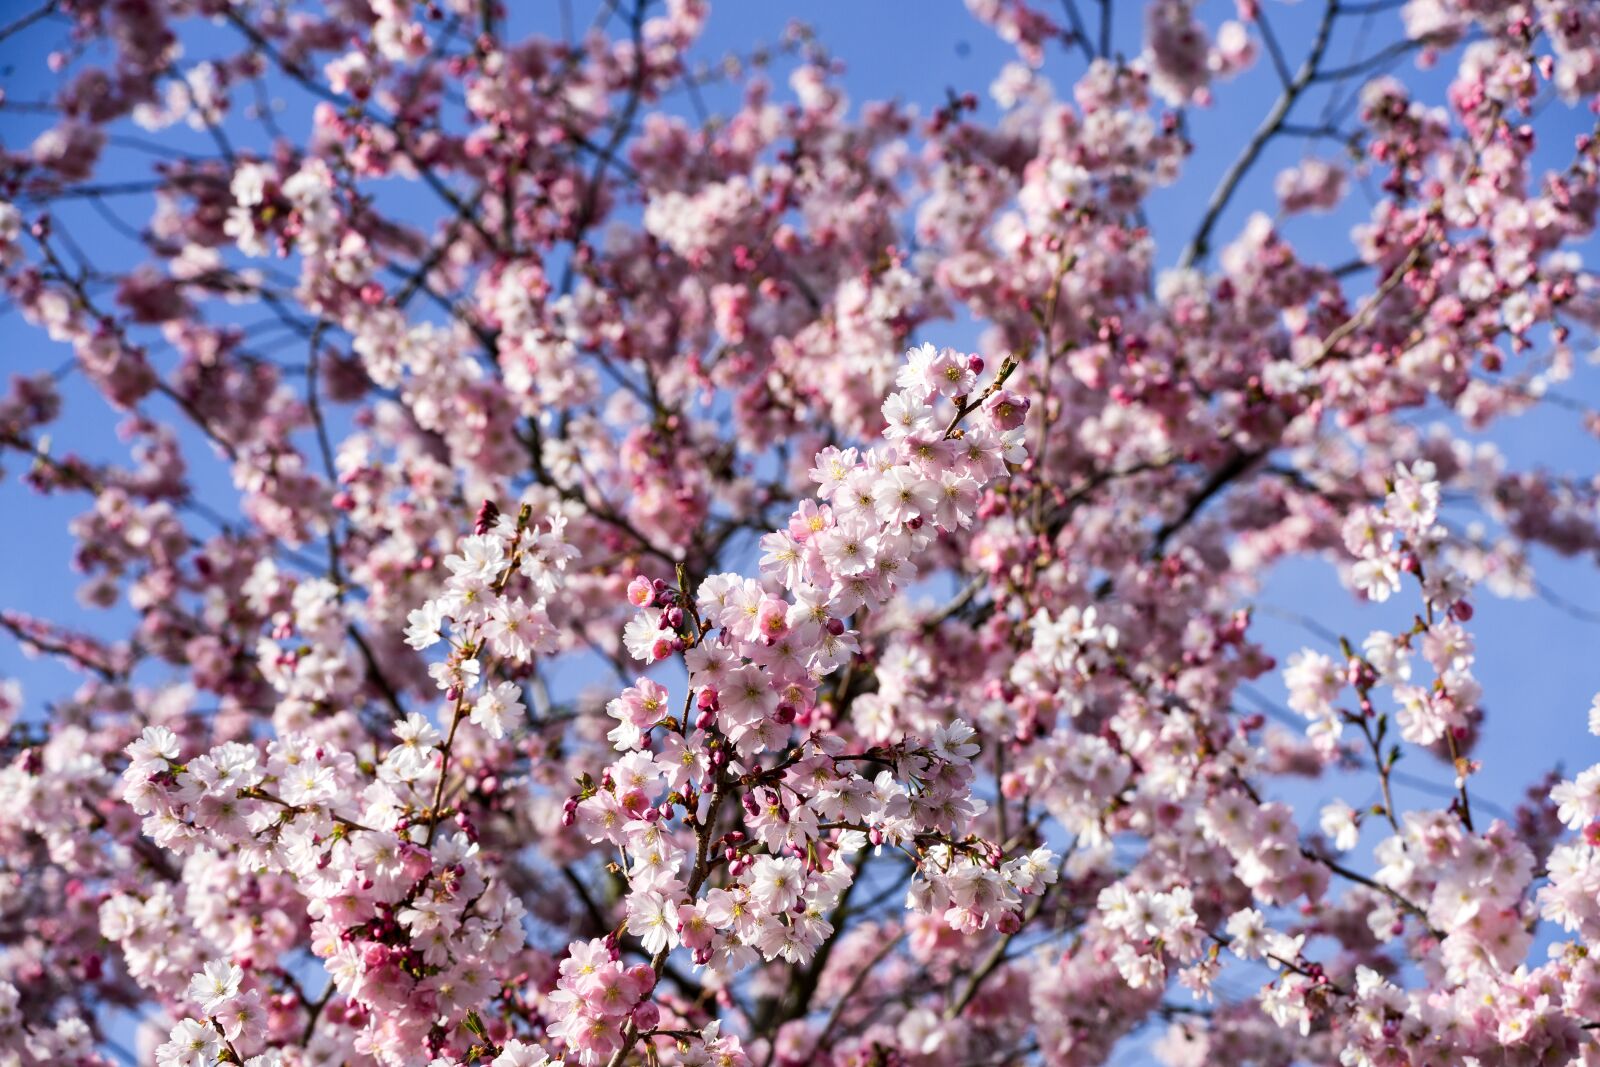 Sony a7 sample photo. Kirch blossoms, flowers, pink photography